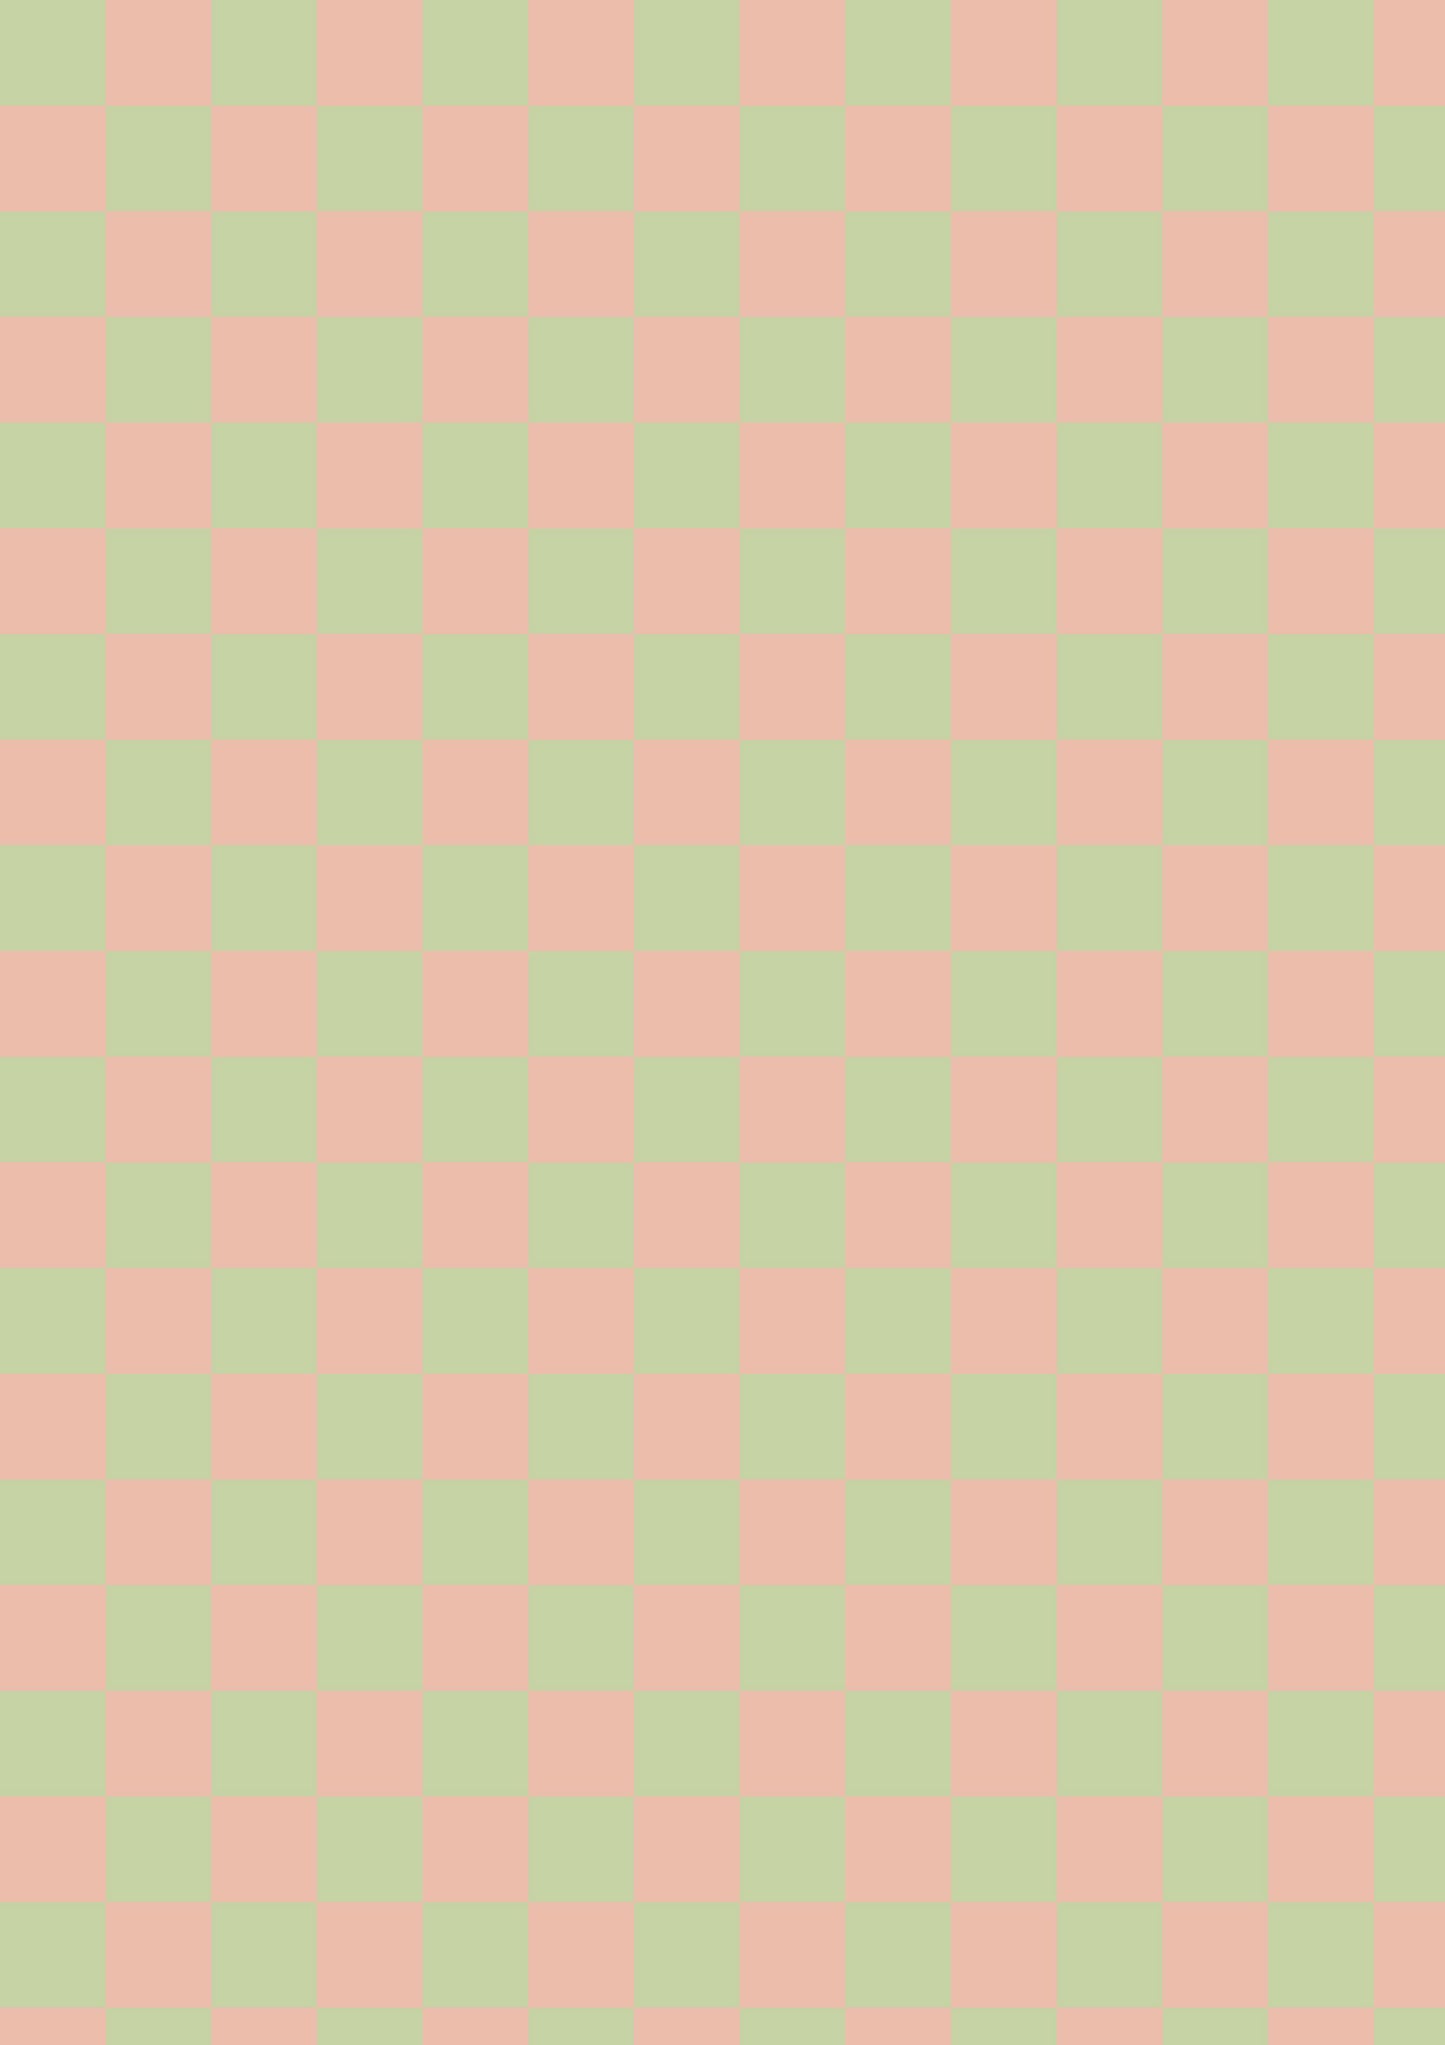 Checkerboard A1 Photography Backdrop - Green and Peach